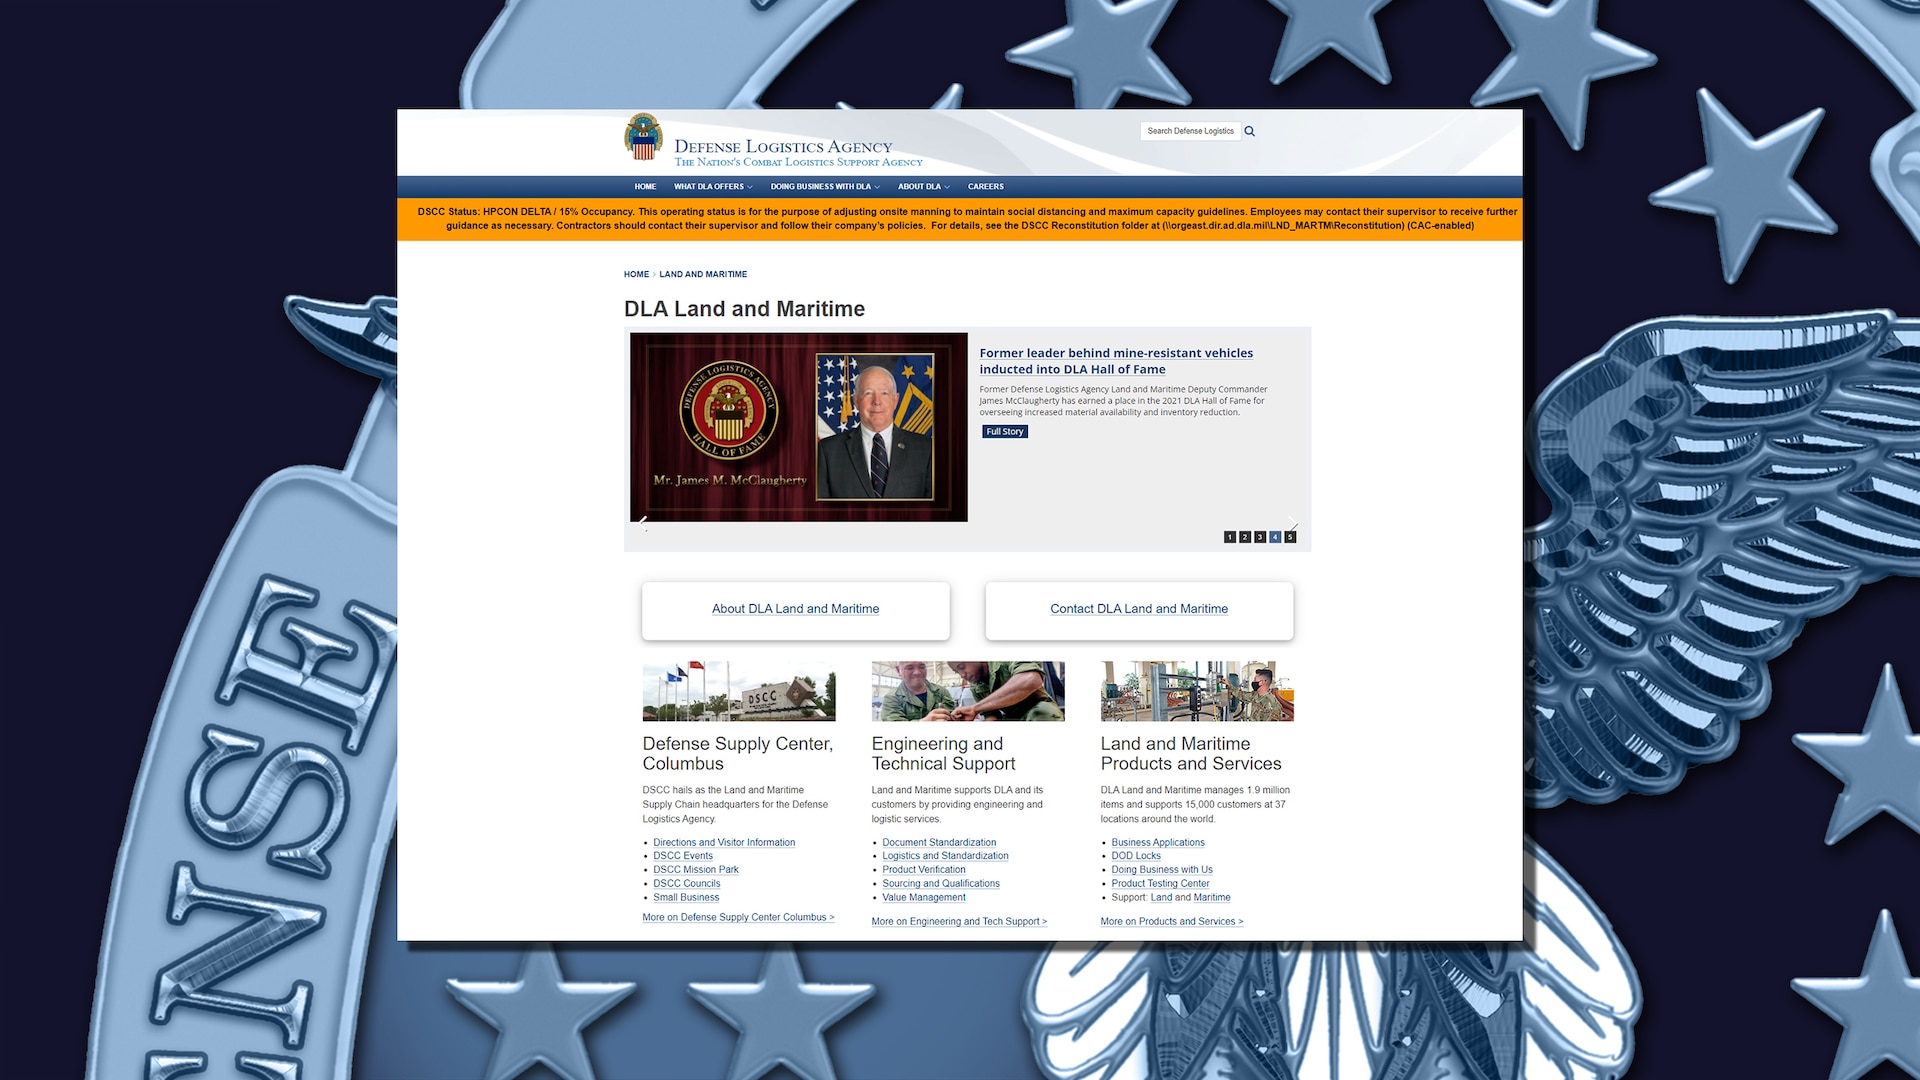 Main image with website homepage  screenshot embedded on a DLA logo background in blue.